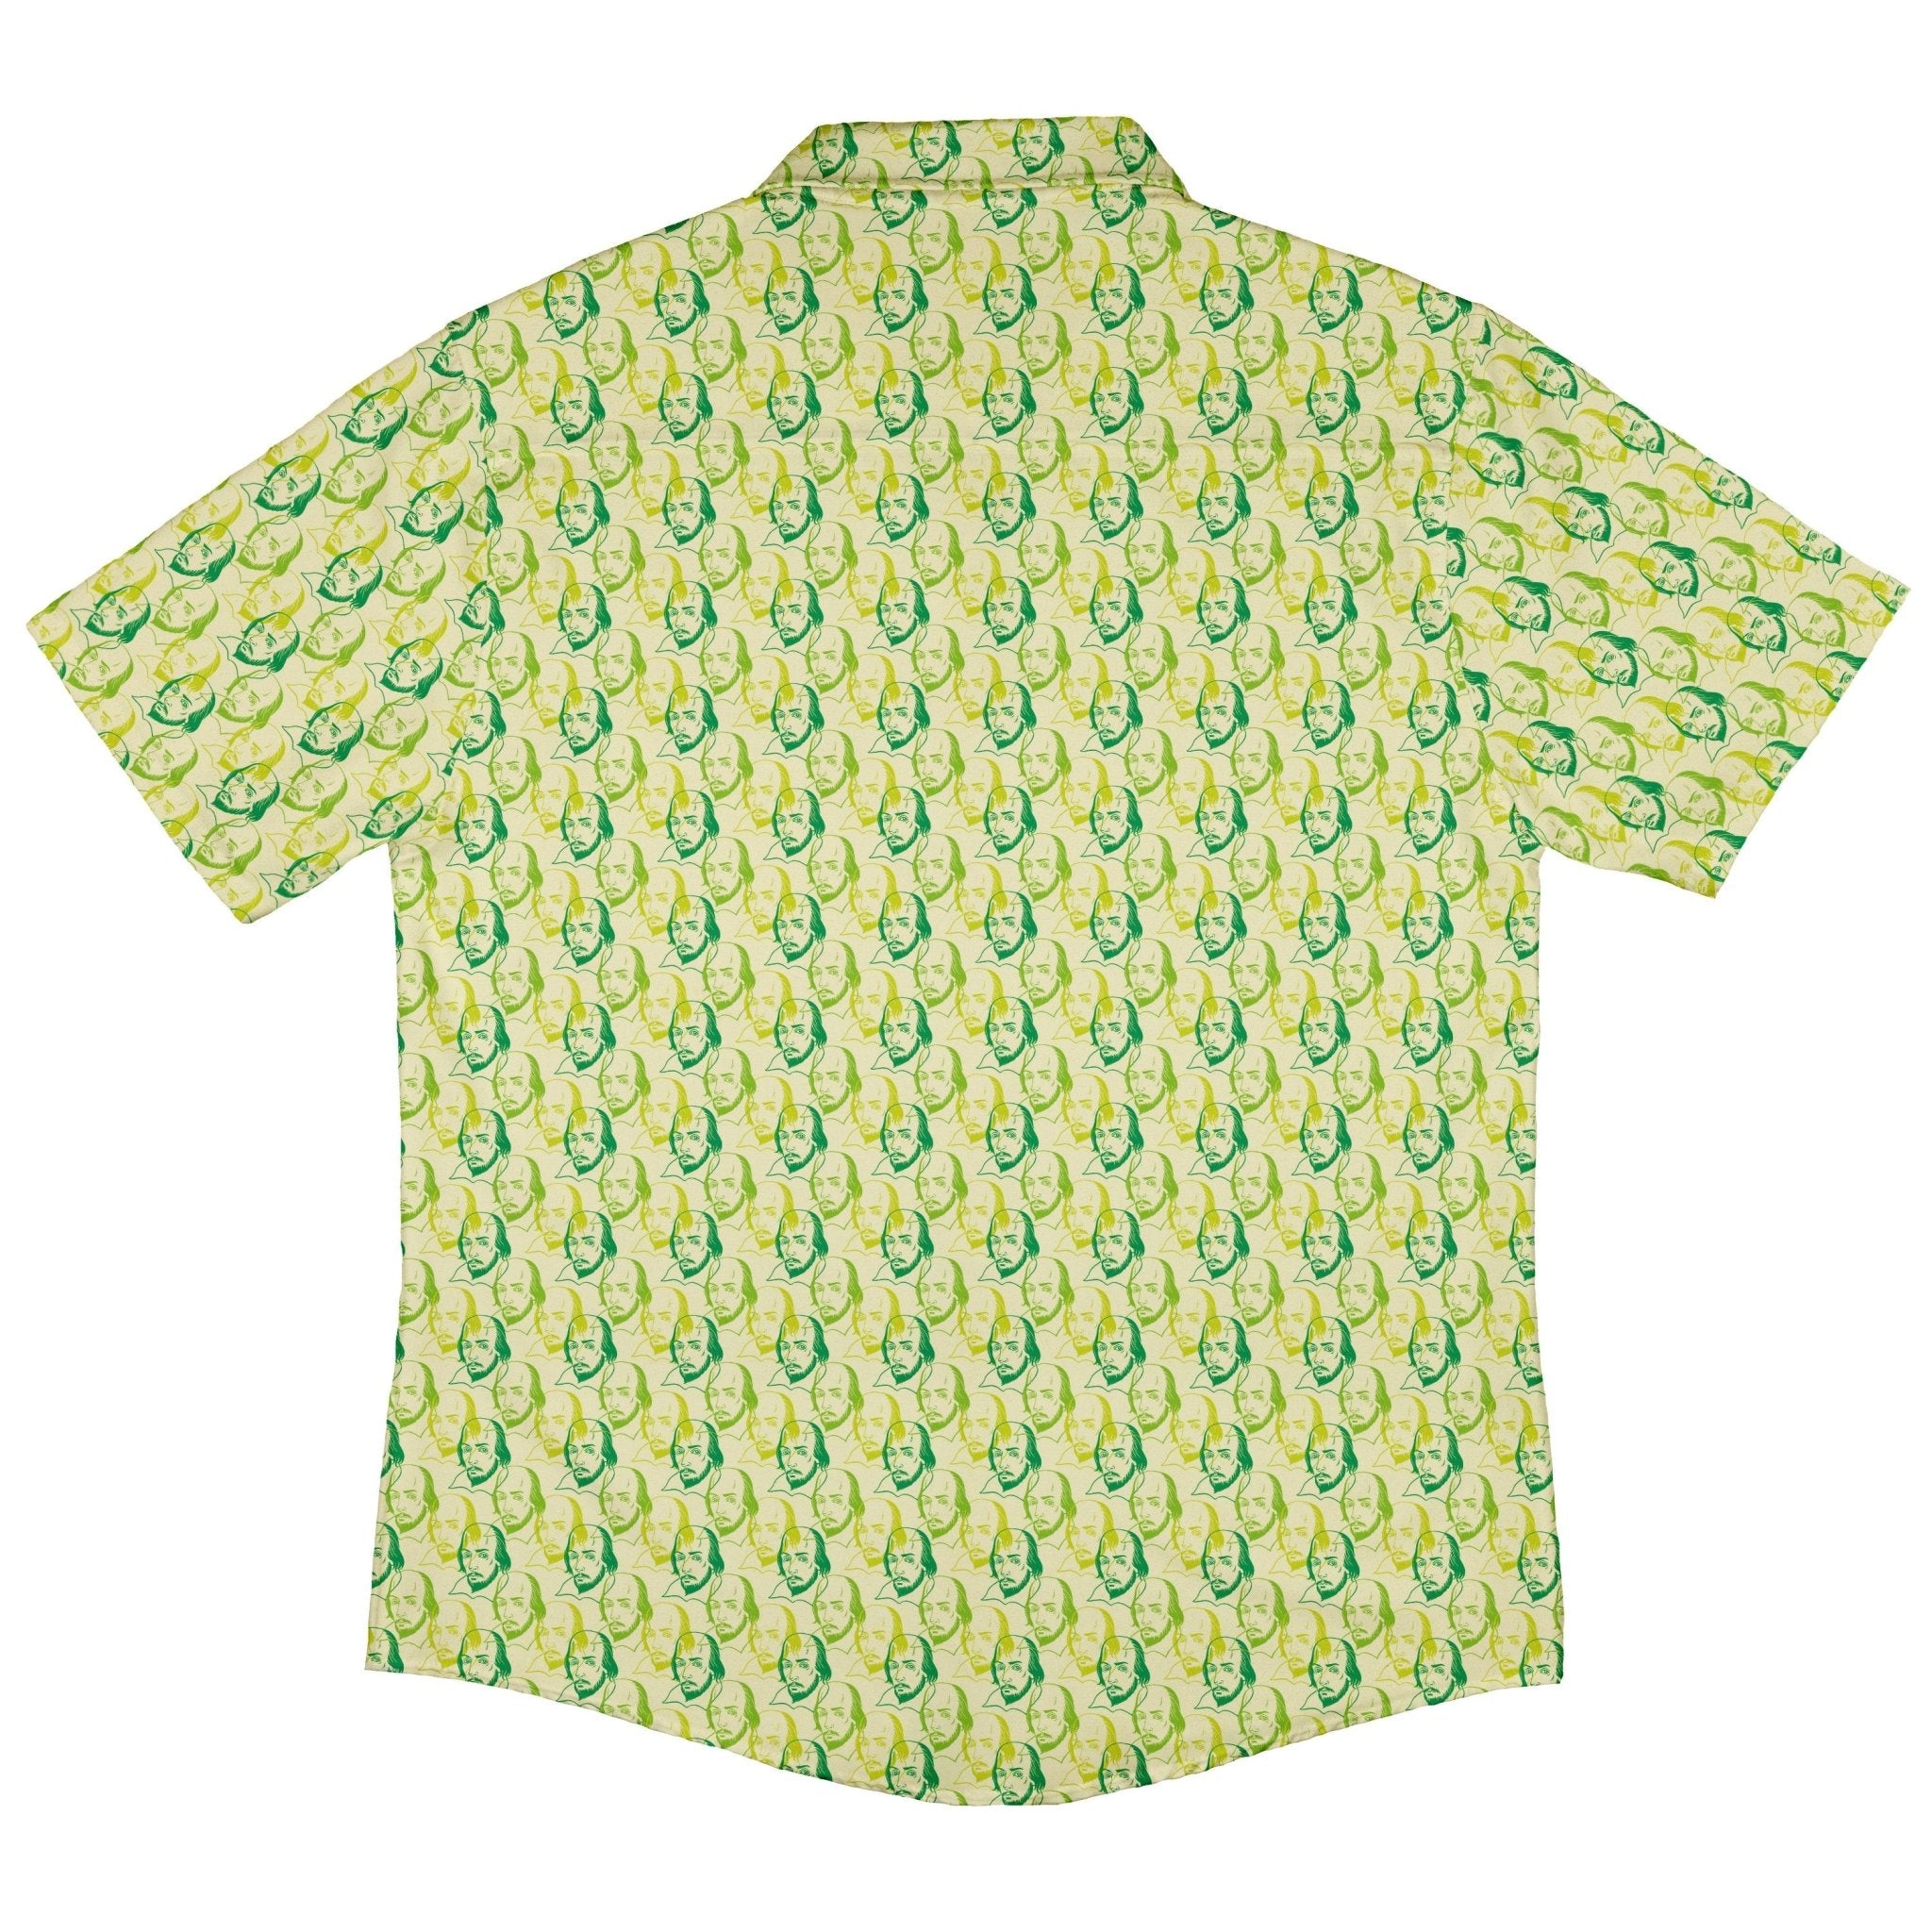 Shakespeare Green Monochrome Button Up Shirt - adult sizing - Book Prints - Simple Patterns